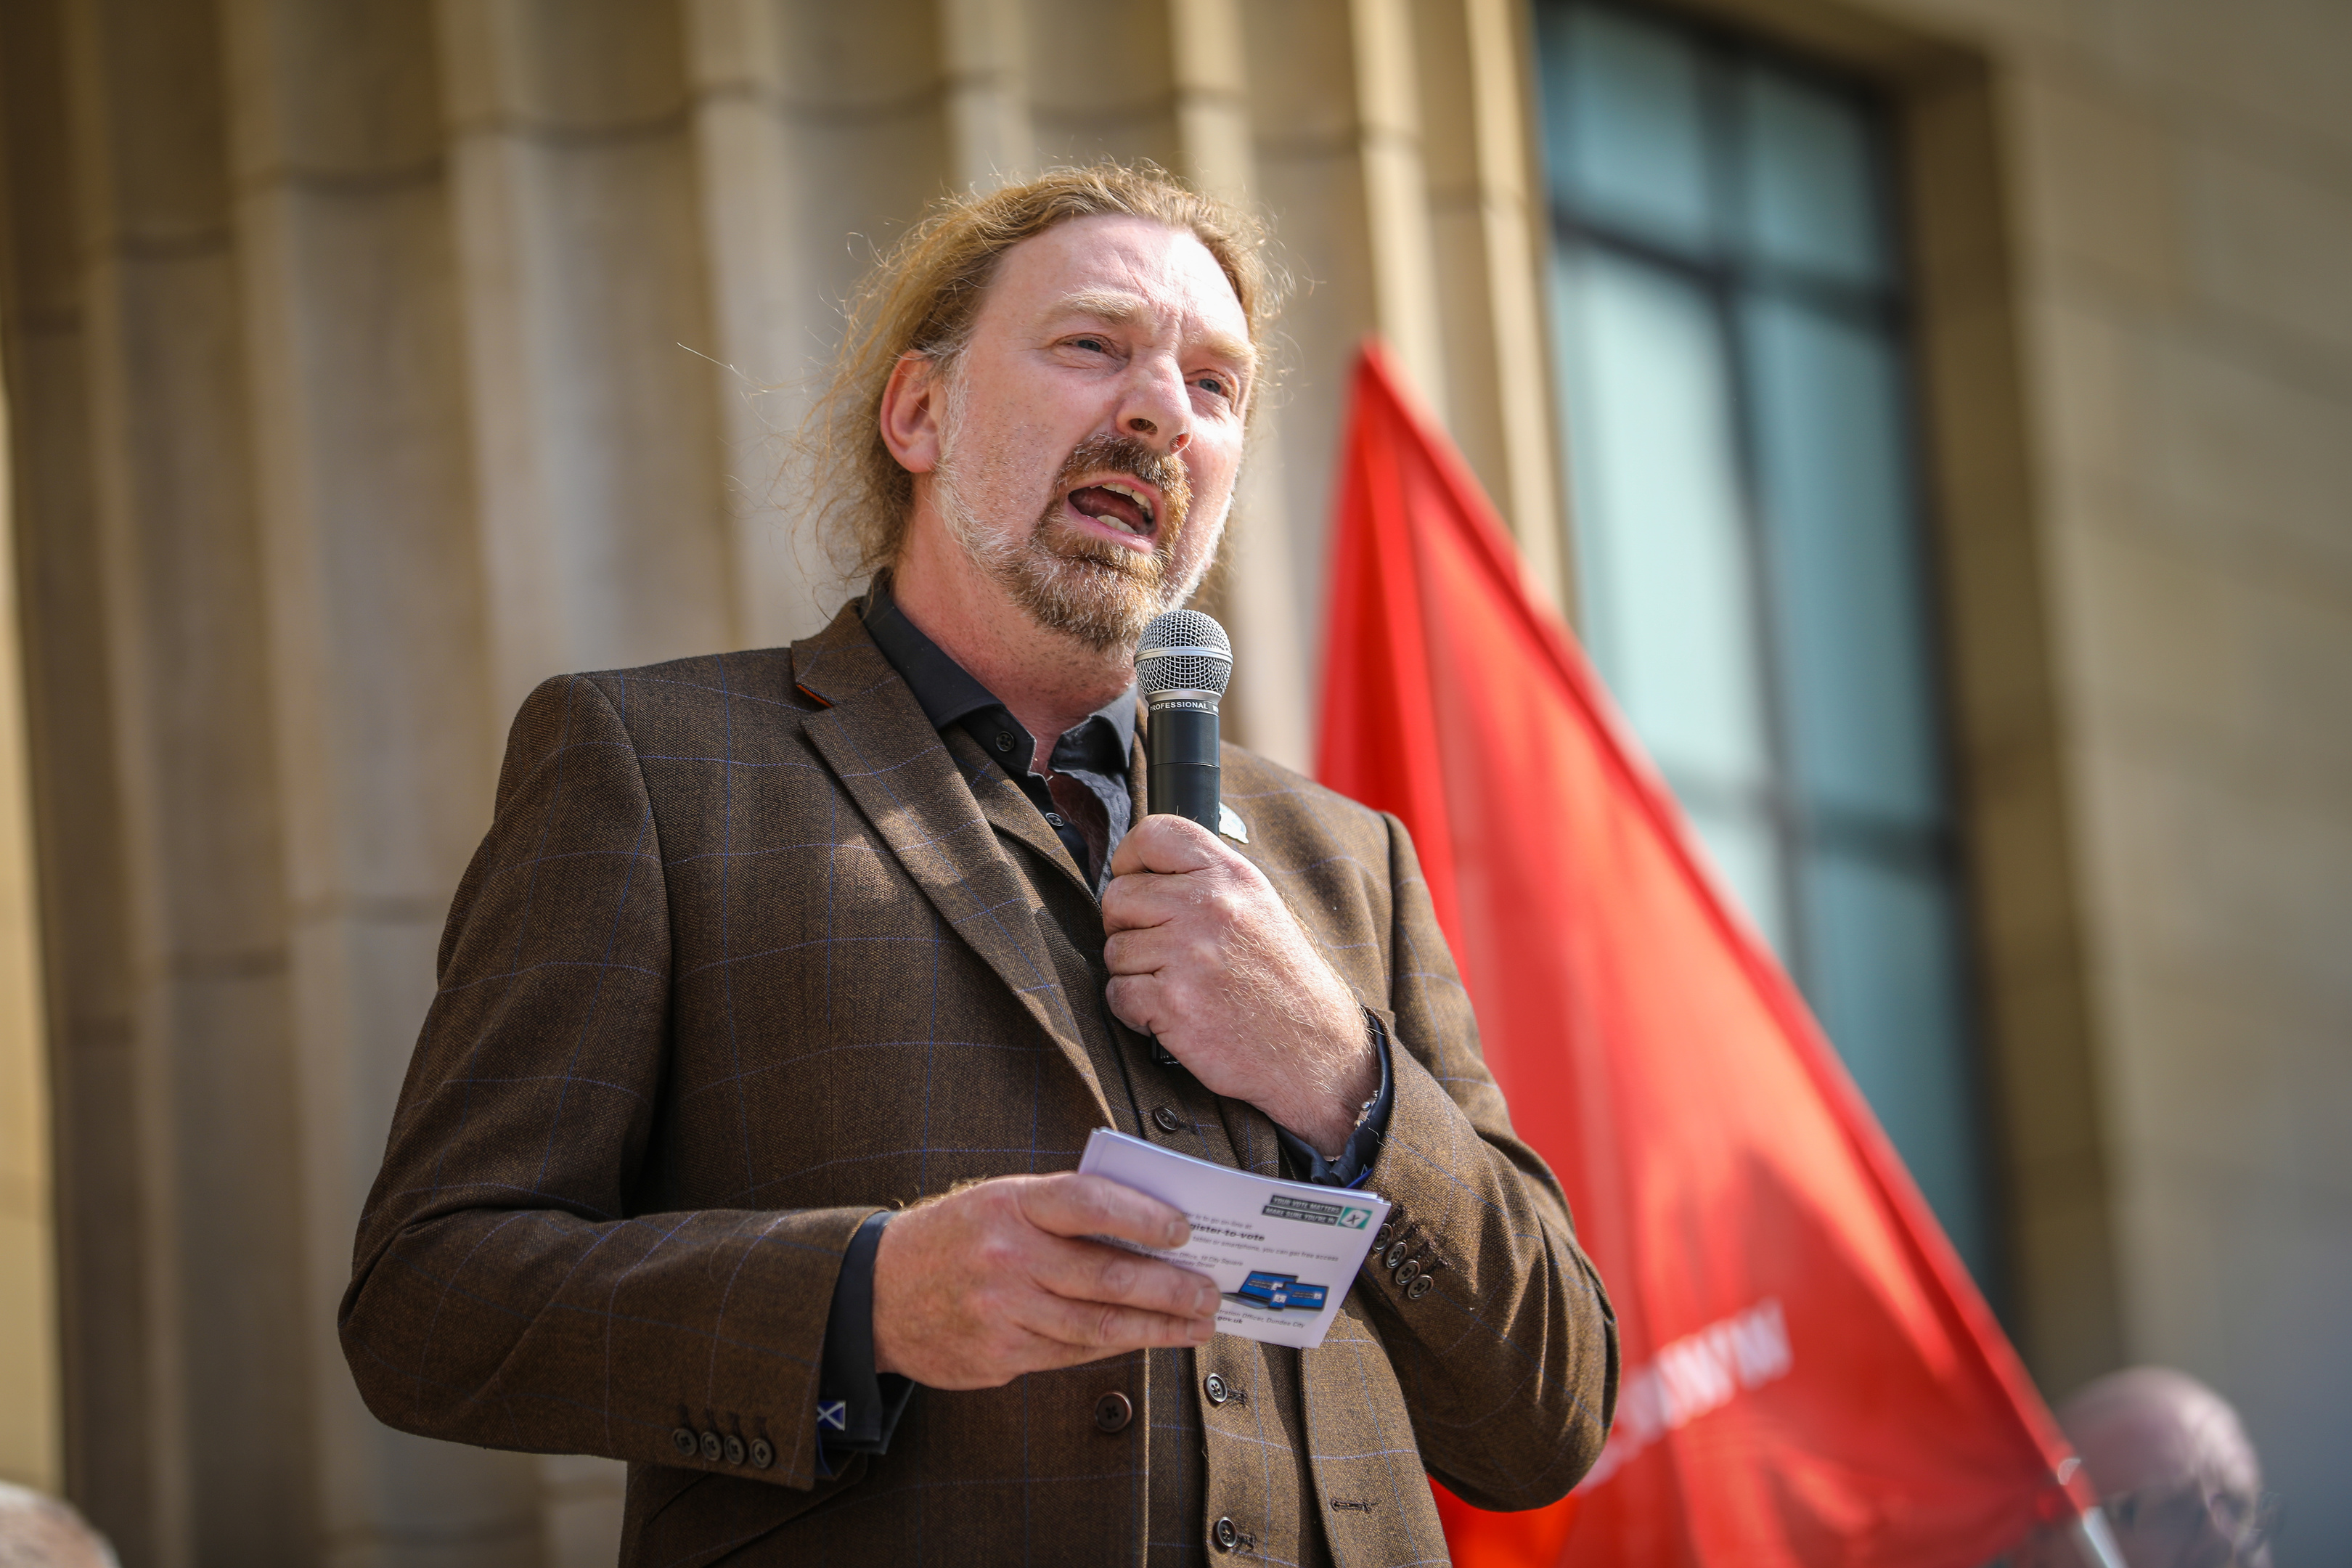 Dundee West MP Chris Law